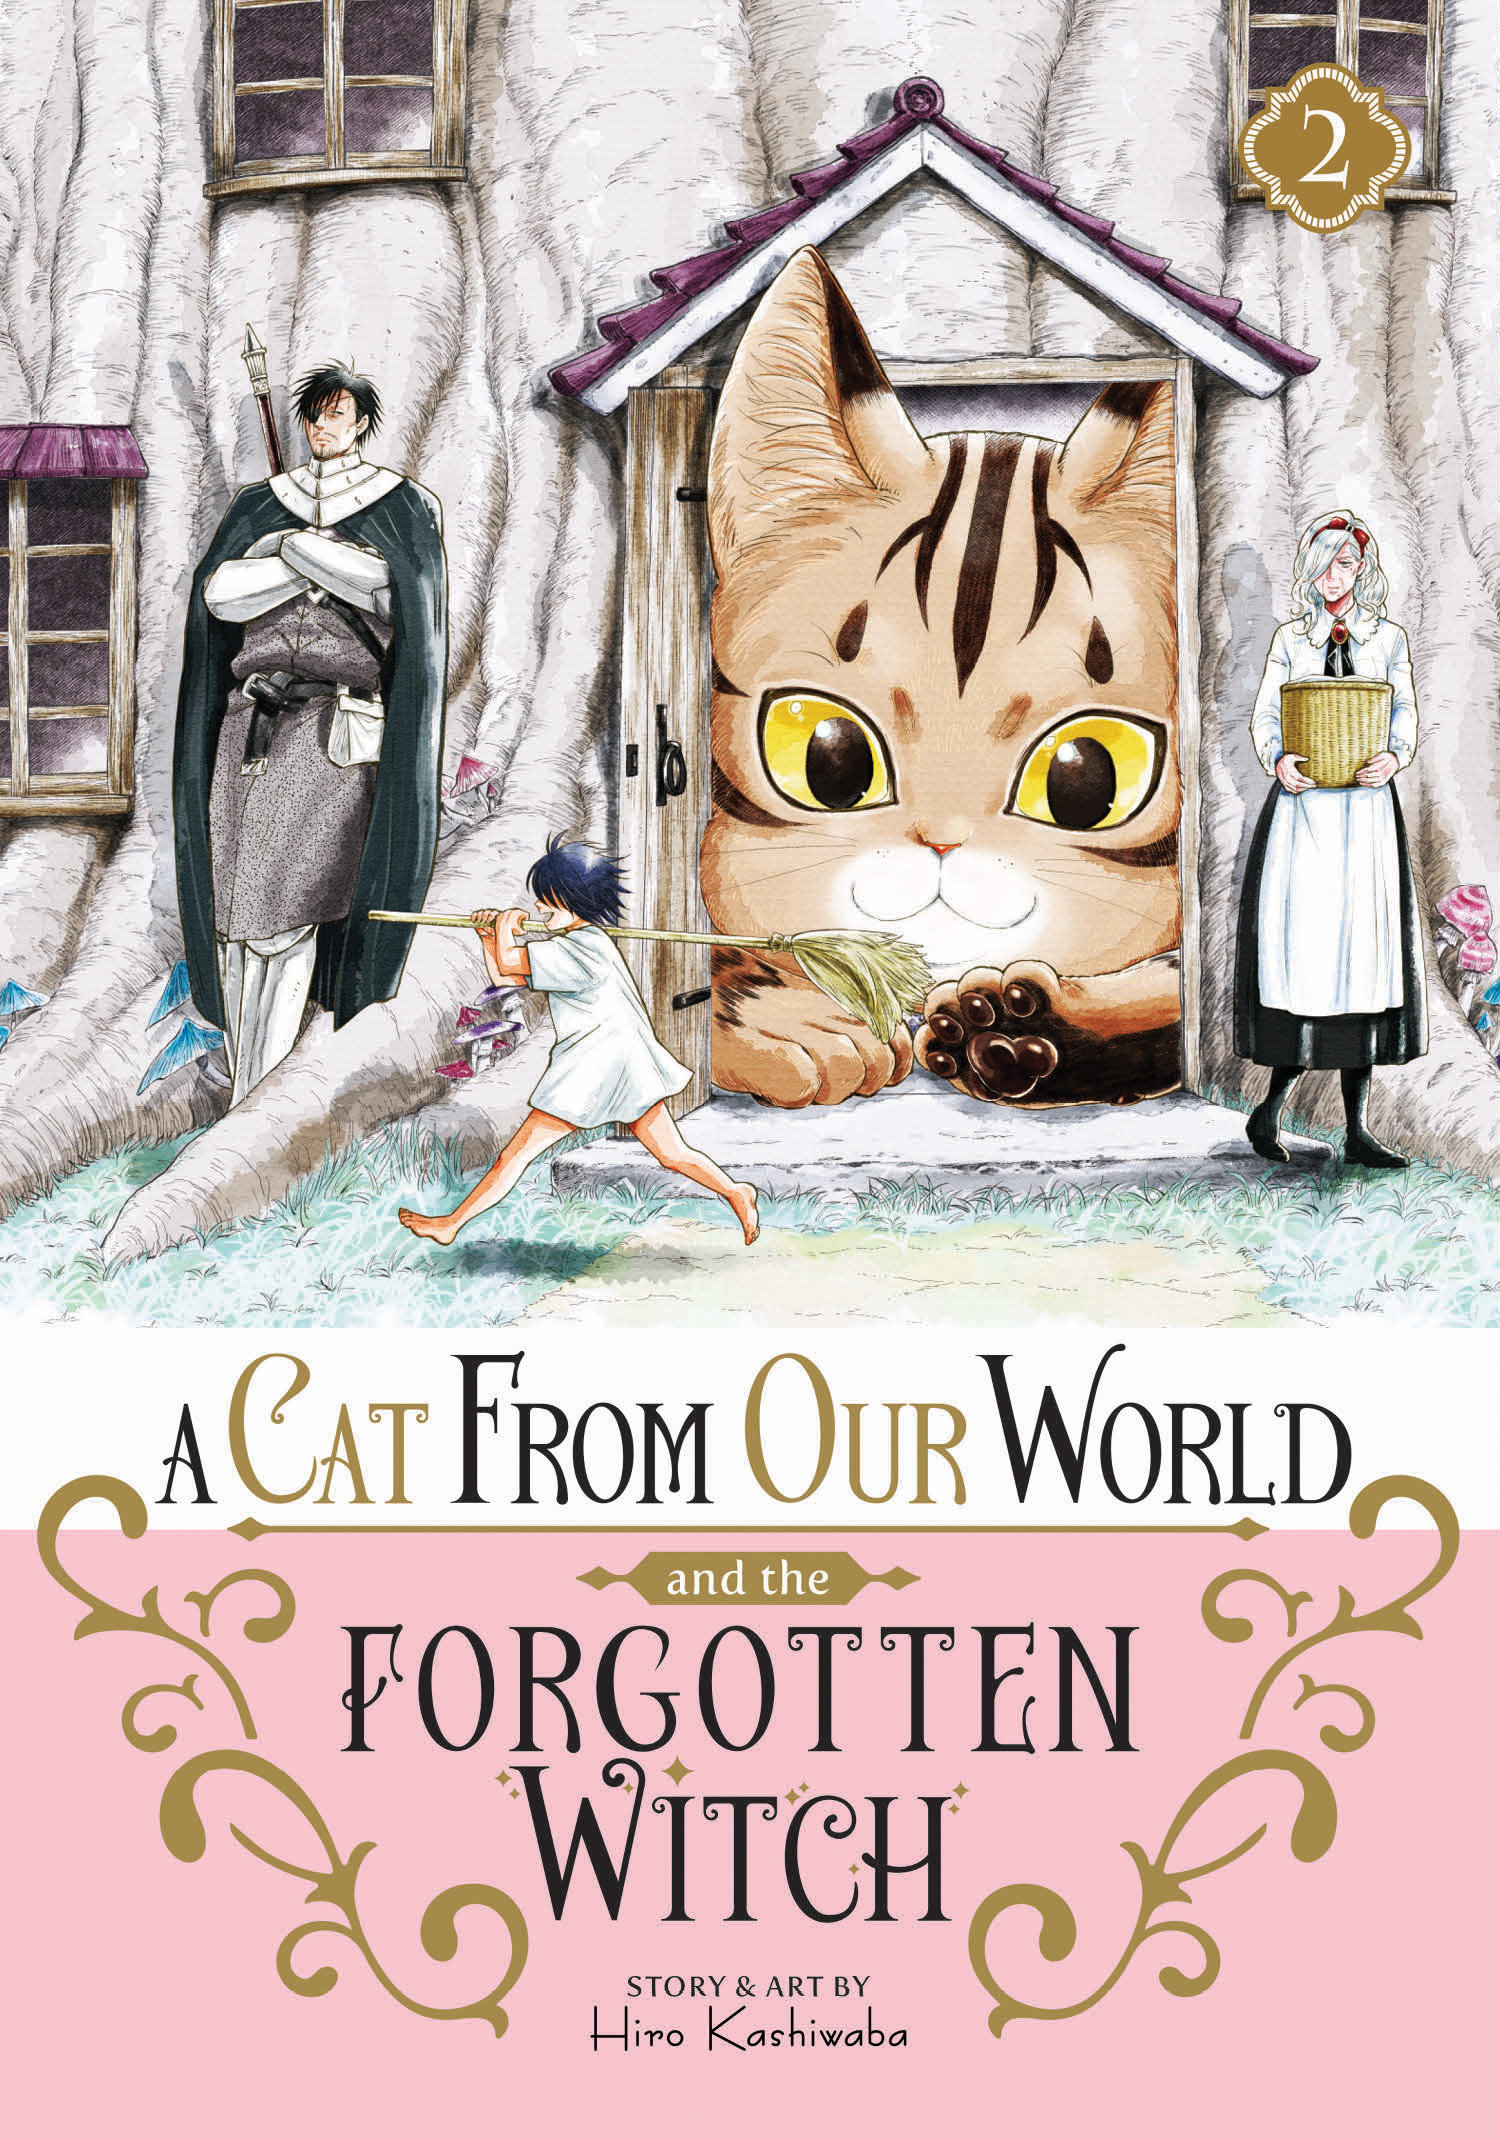 A Cat from Our World and the Forgotten Witch Manga Volume 2